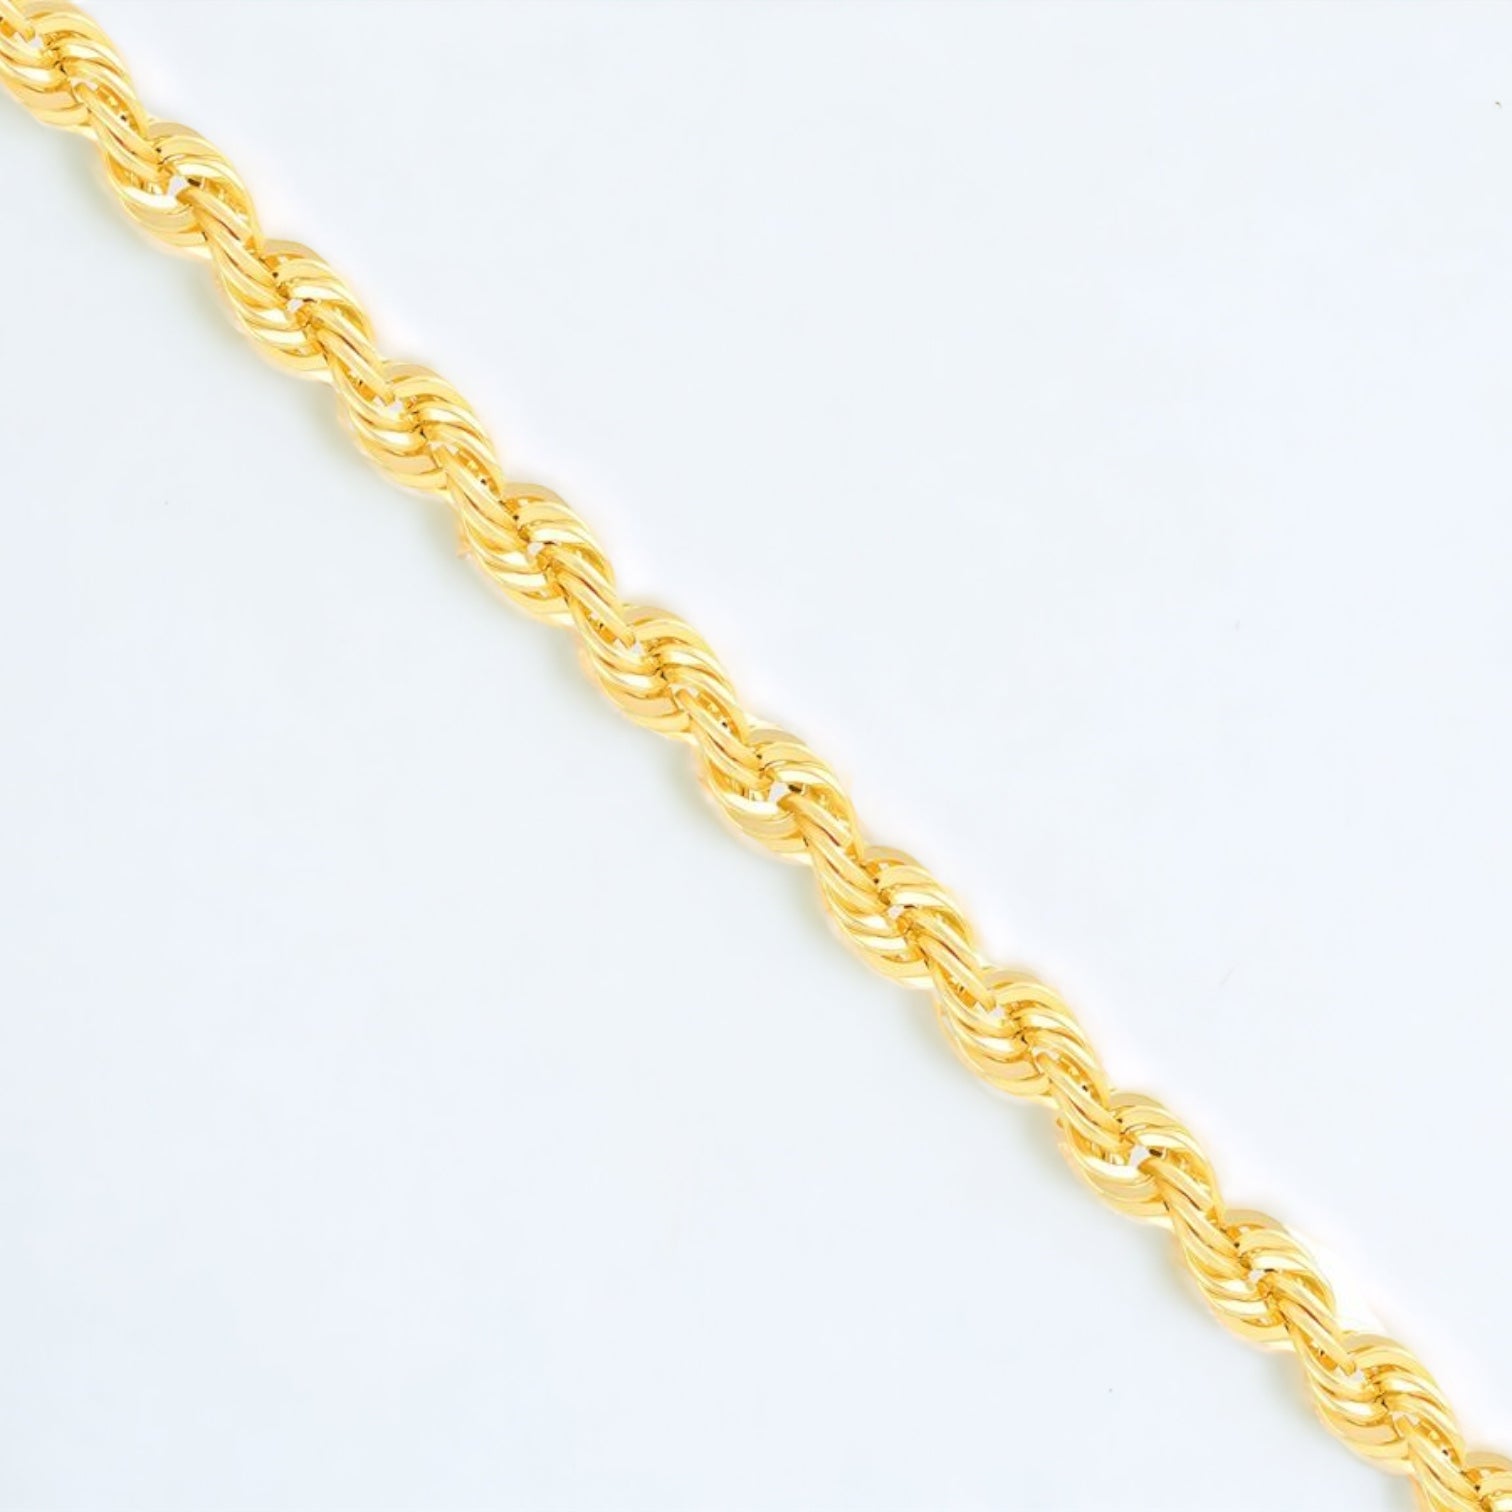 6mm 9ct solid Gold Rope Chain | 22" - 24"